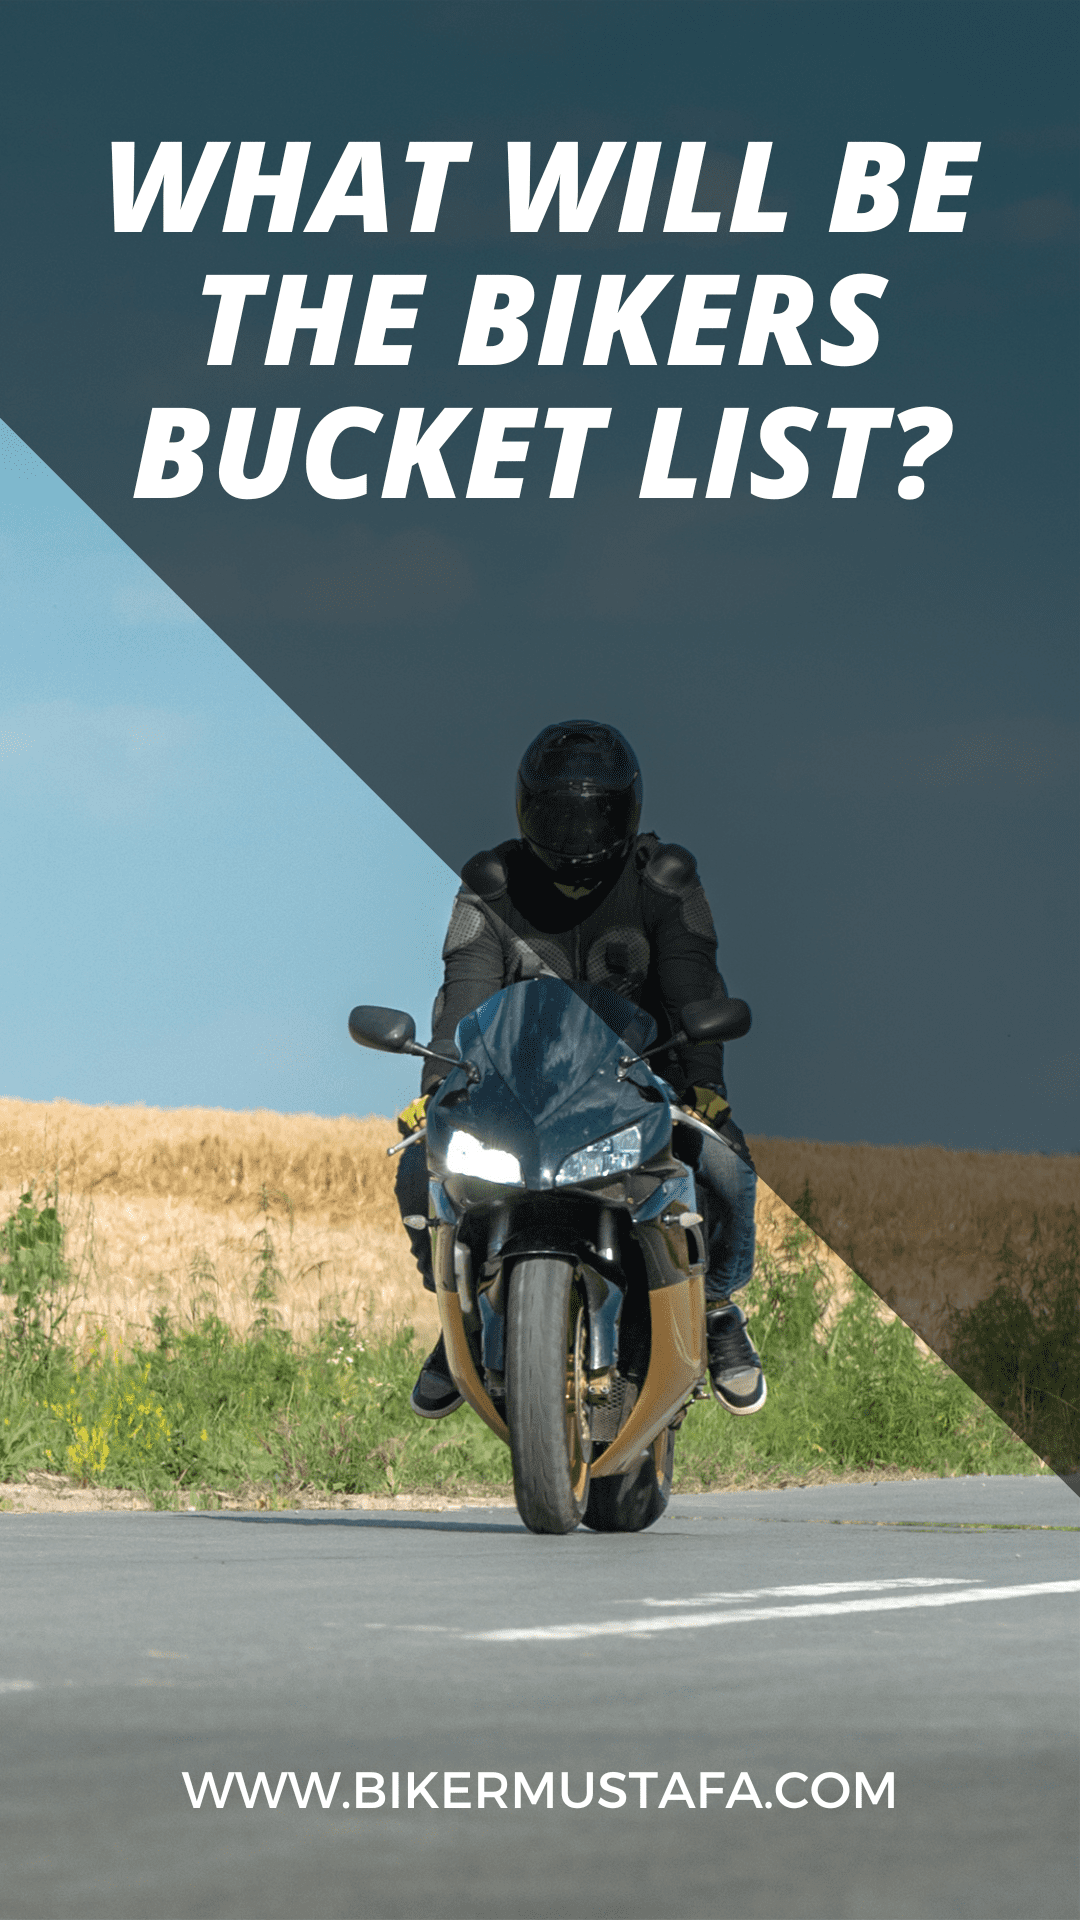 What Will Be The Bikers Bucket List?